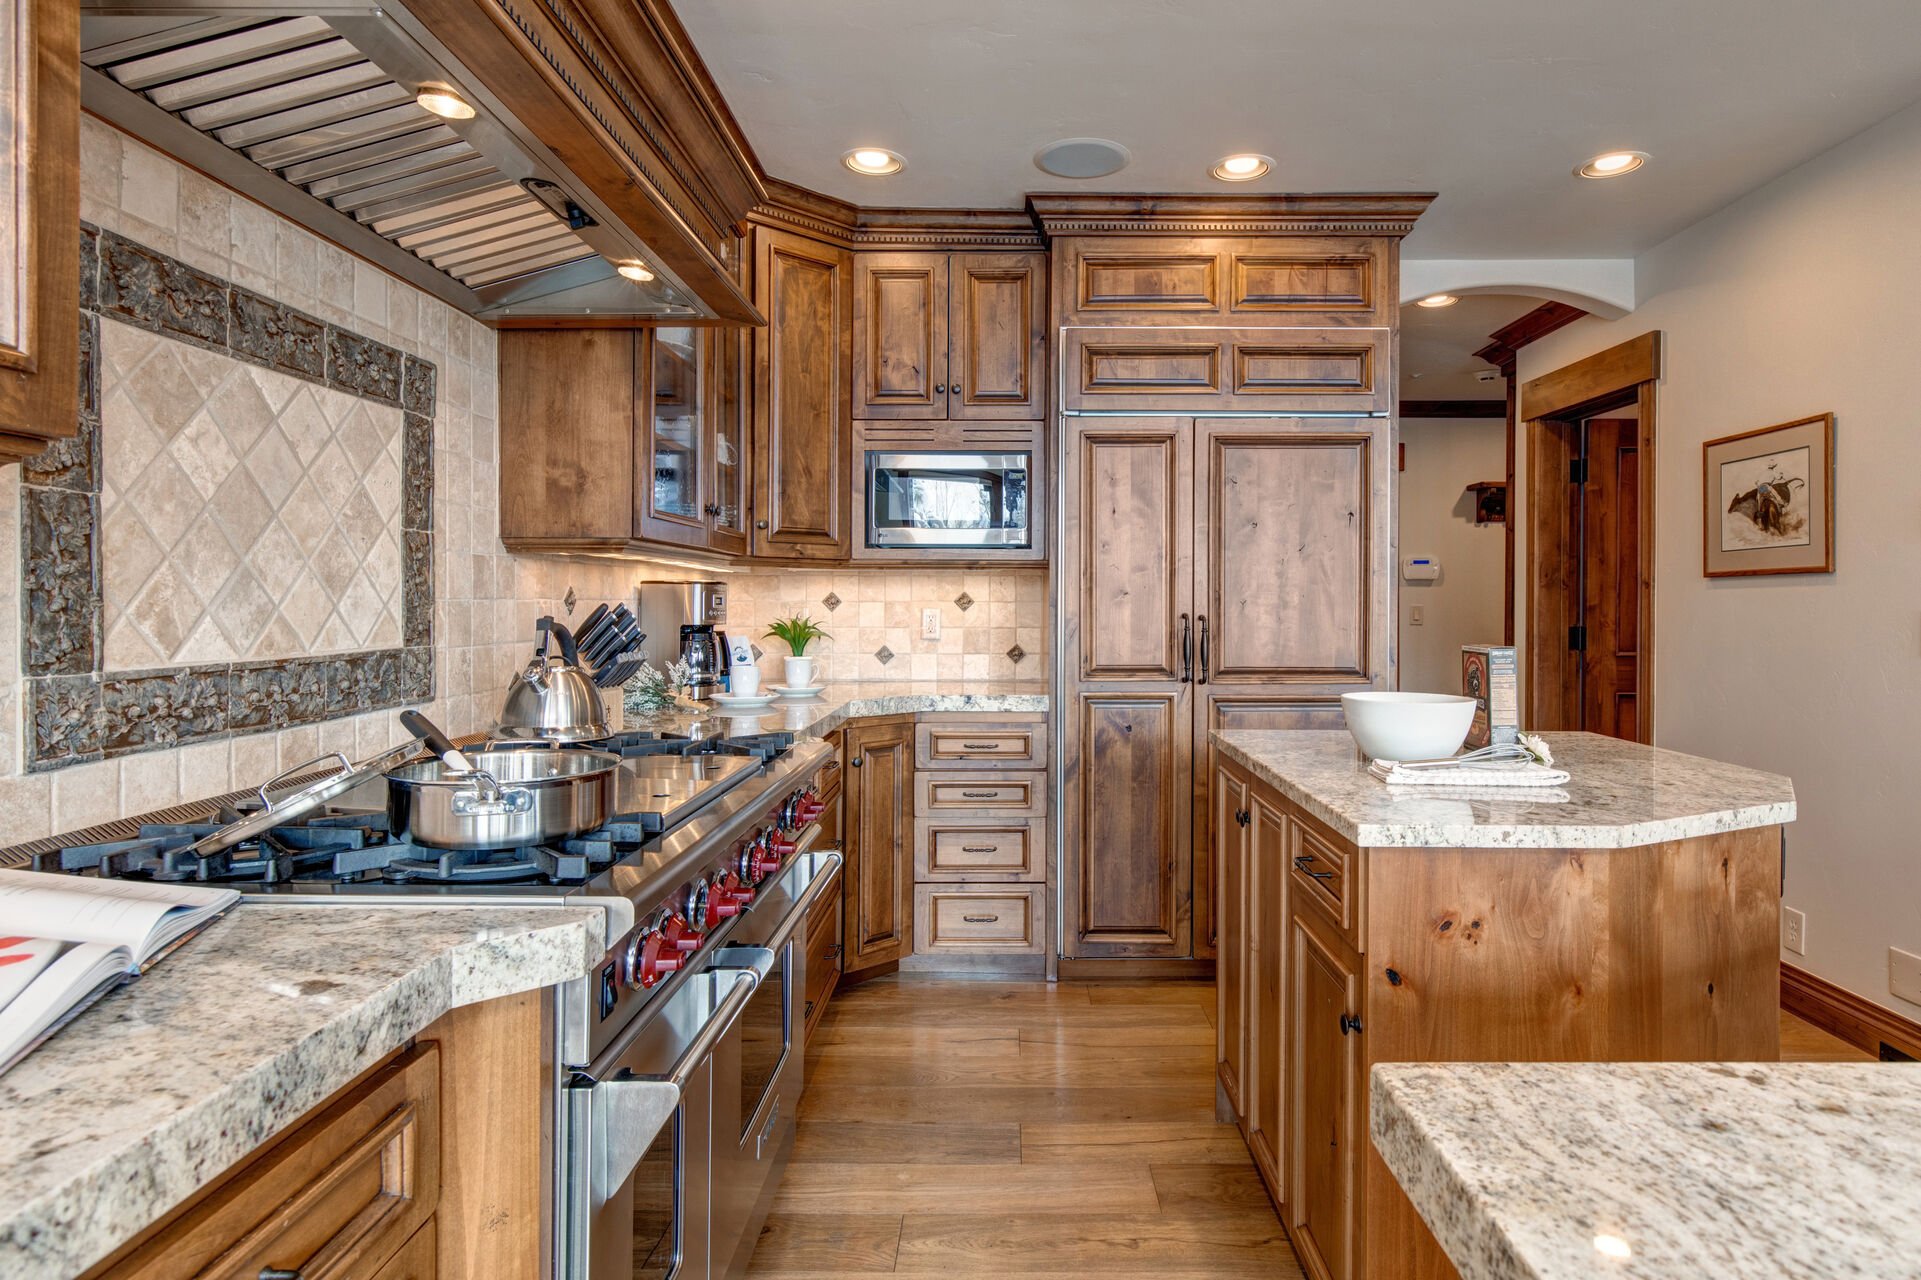 Fully Equipped Kitchen with stainless steel Wolff appliances, sub-zero fridge, double ovens, gorgeous stone countertops, separate island, and bar seating for 5